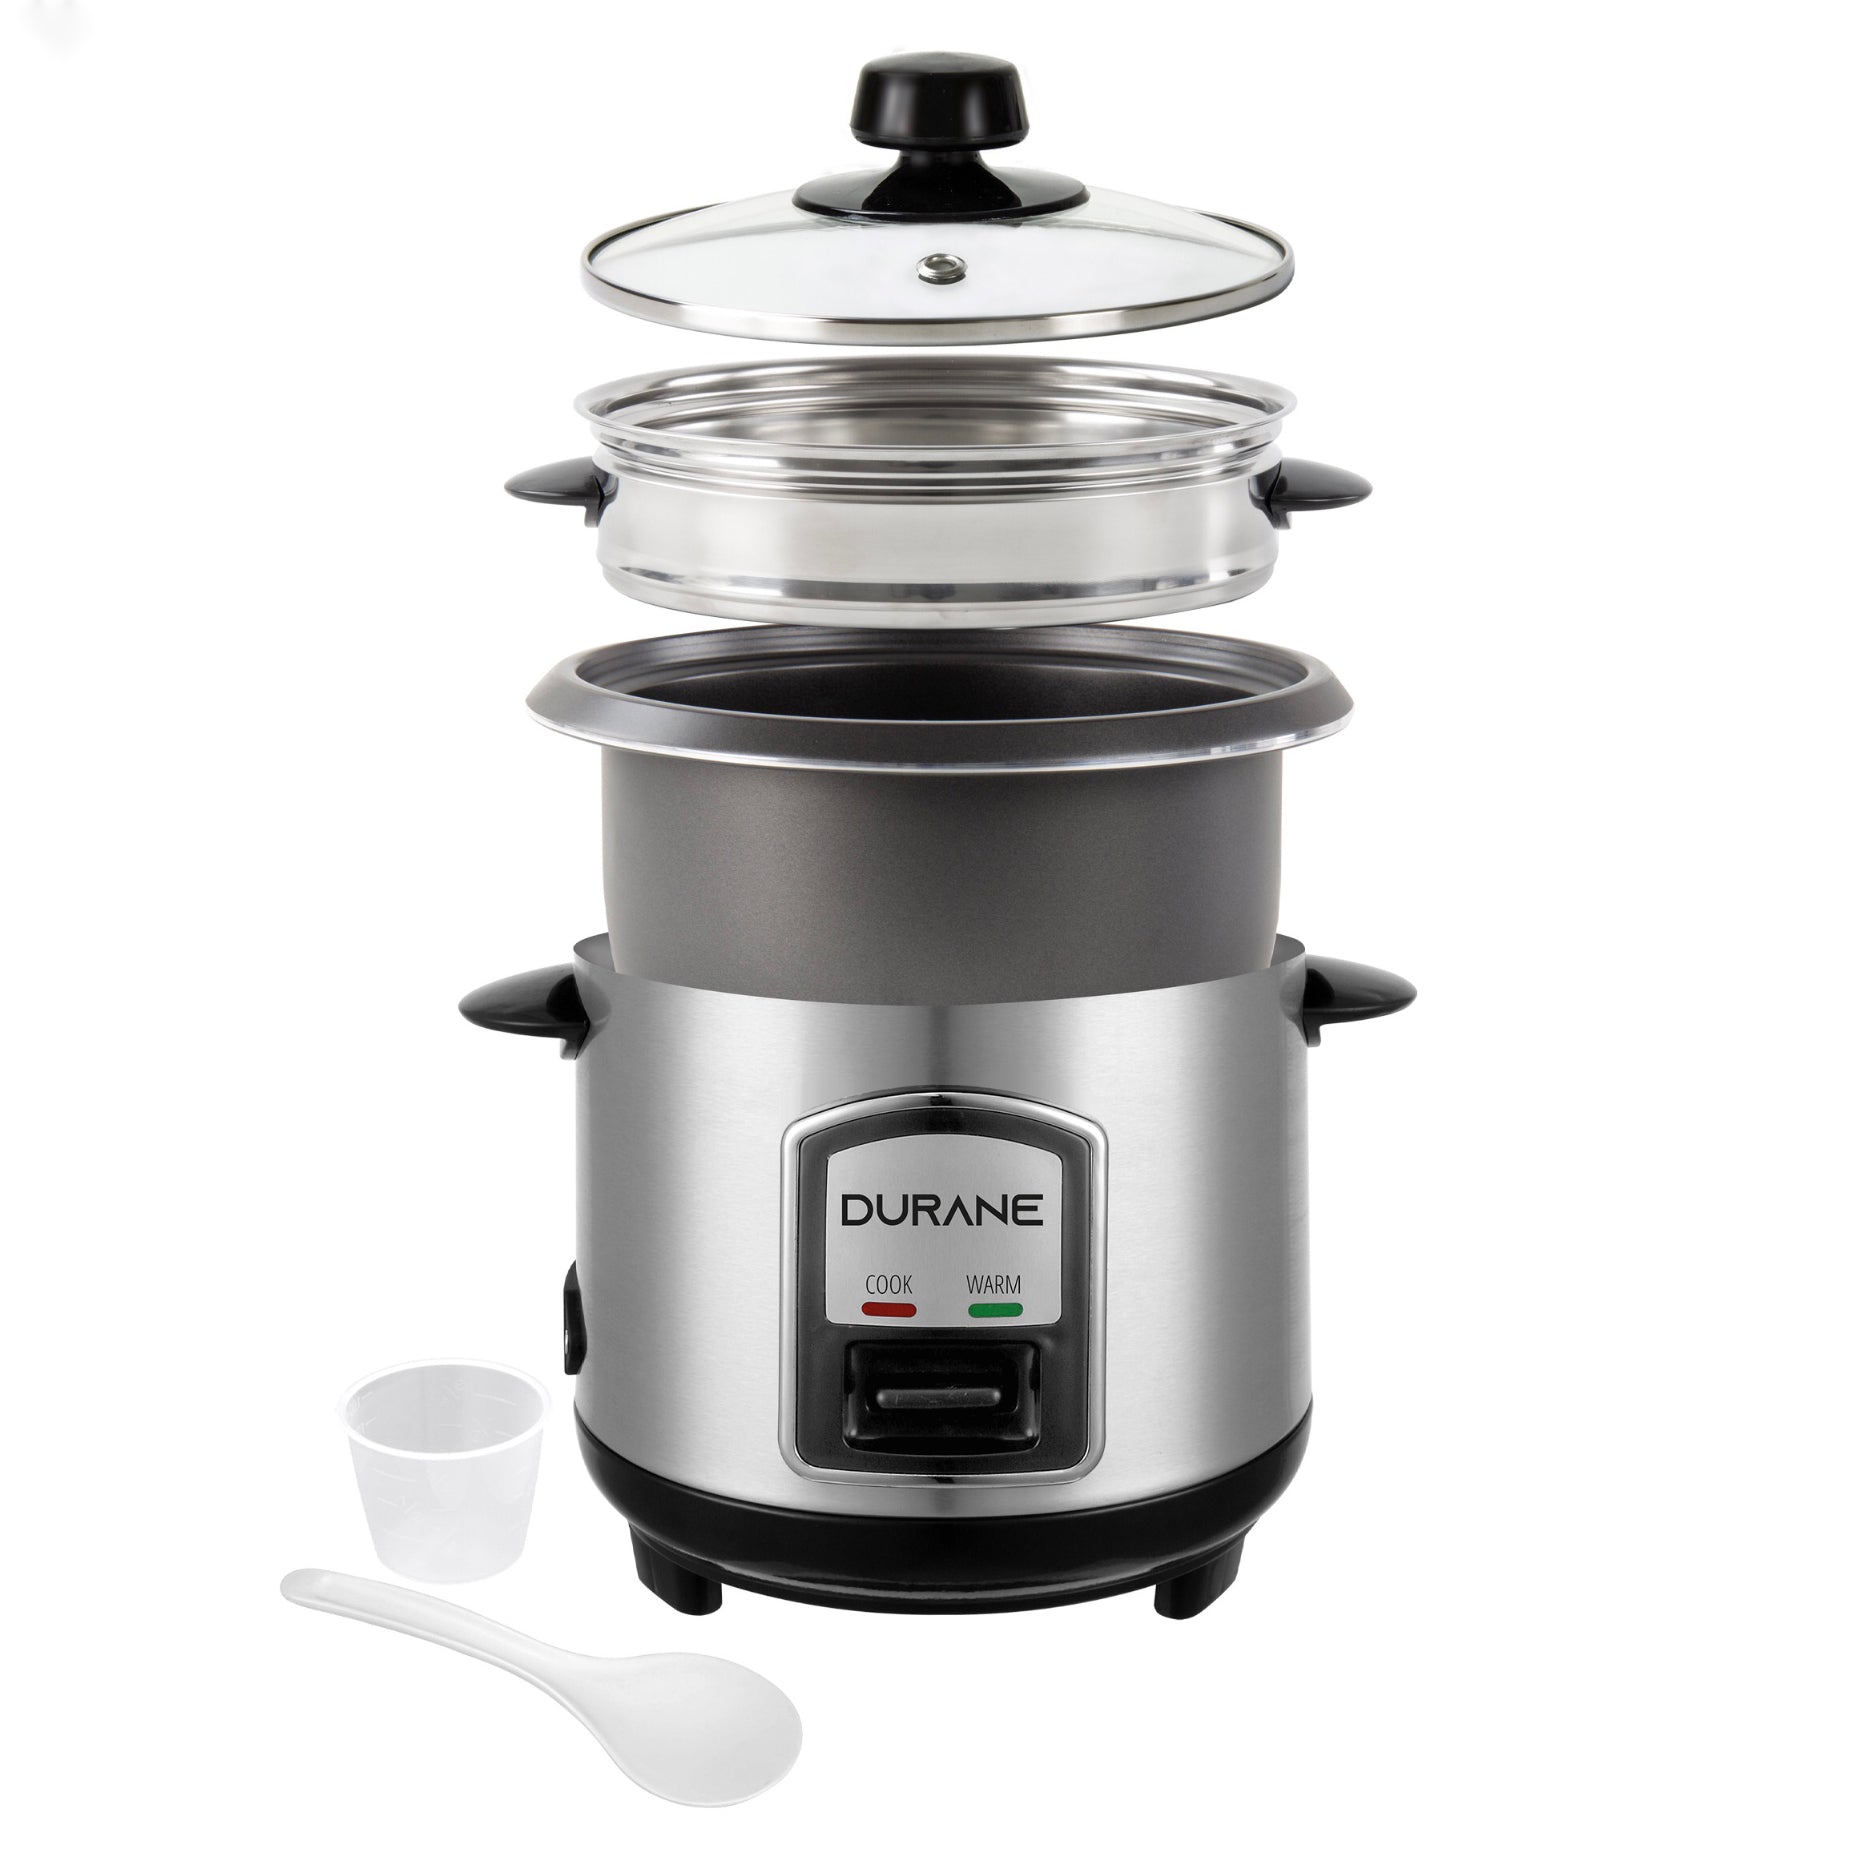 Durane Stainless Steel Rice Cooker and Steamer - 1.8L